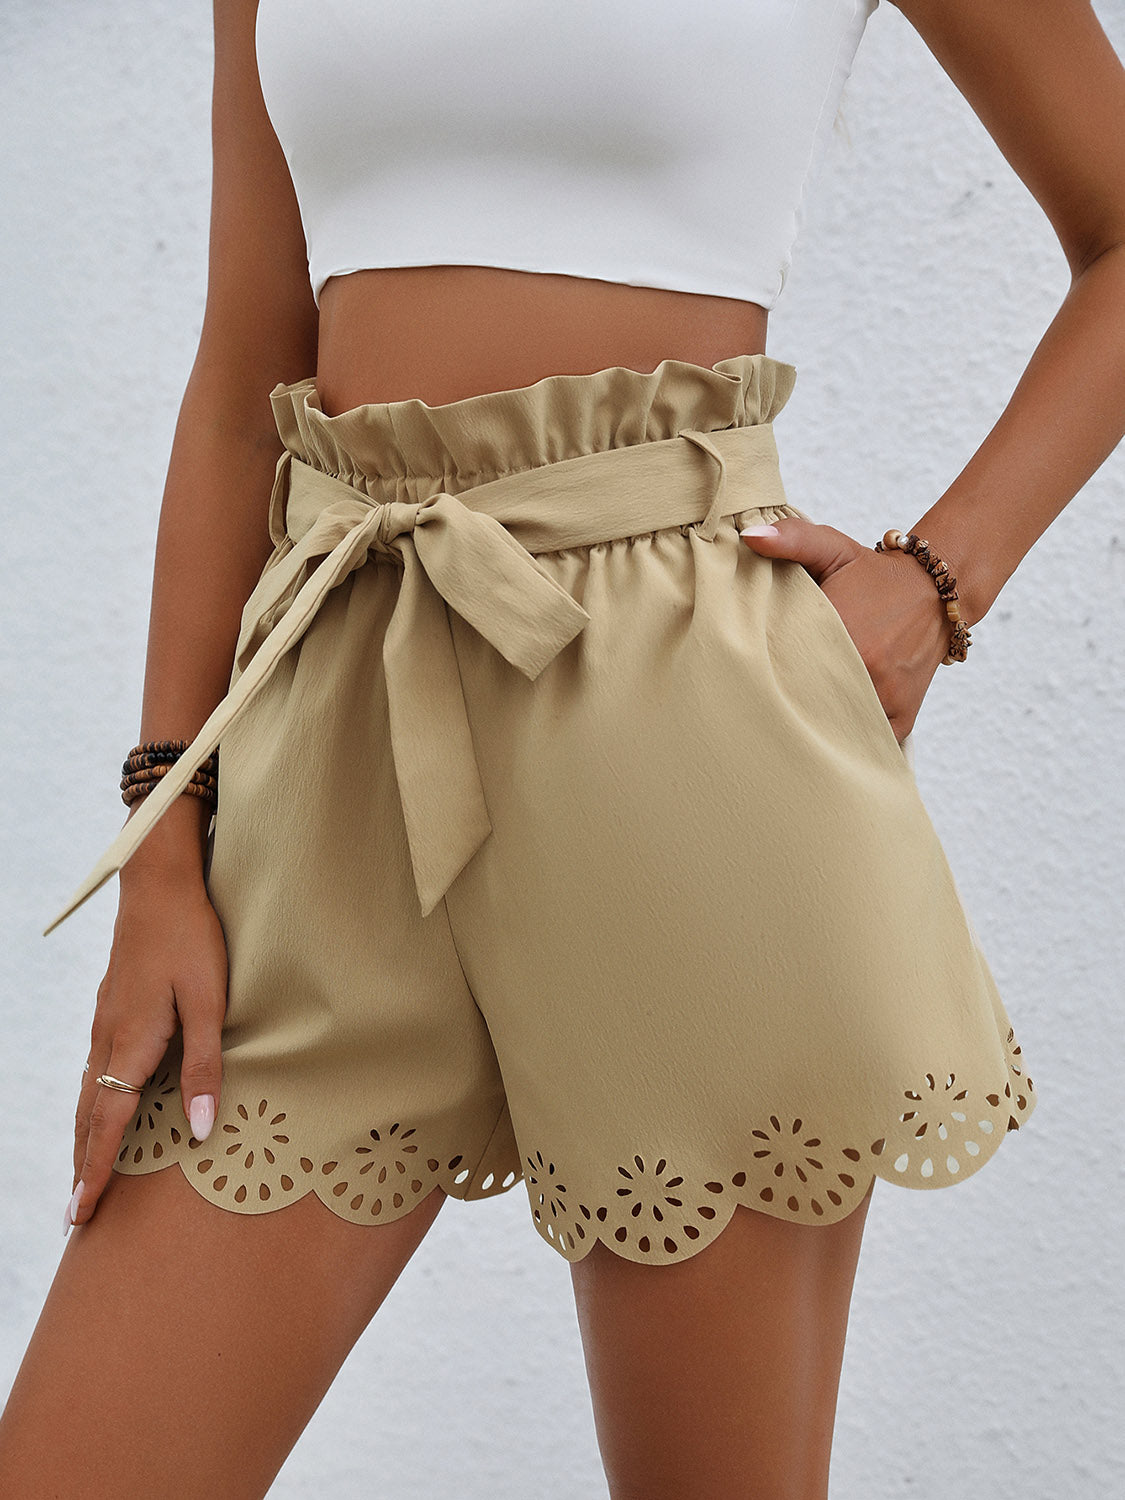 Elevate your style with our chic Tie Belt Paperbag Waist Shorts, perfect for any occasion. Available in black and khaki. Shop now!